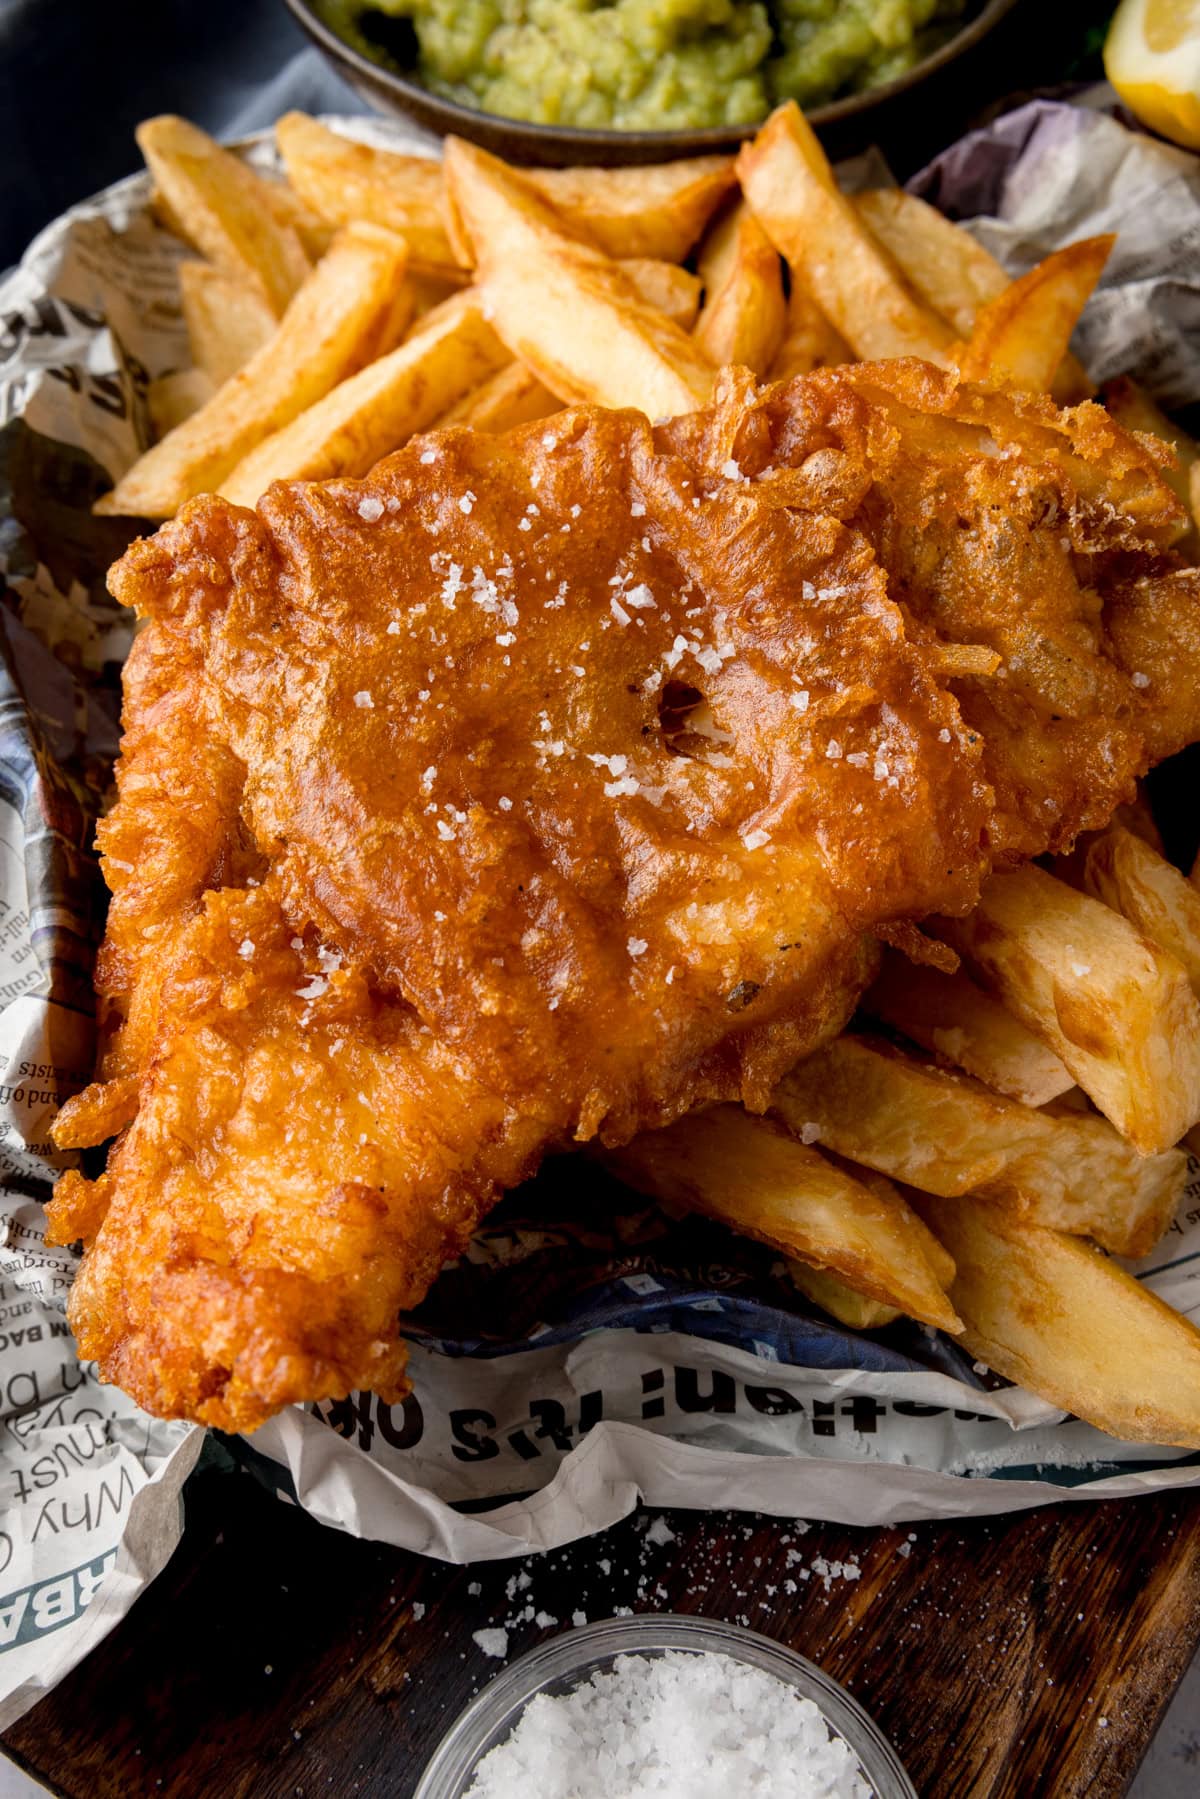 A tall, close-up shot of beer-battered fish. There is one beer-battered fish fillet, topped with flakes of salt, on a bed of chips. The food is on top of a newspaper. In the top middle of the image, there is a black bowl of mushy peas, with another wedge of lemon to the right of it. This is all on a wooden board. On the bottom middle of the wooden board, there is a clear dish of sea salt.